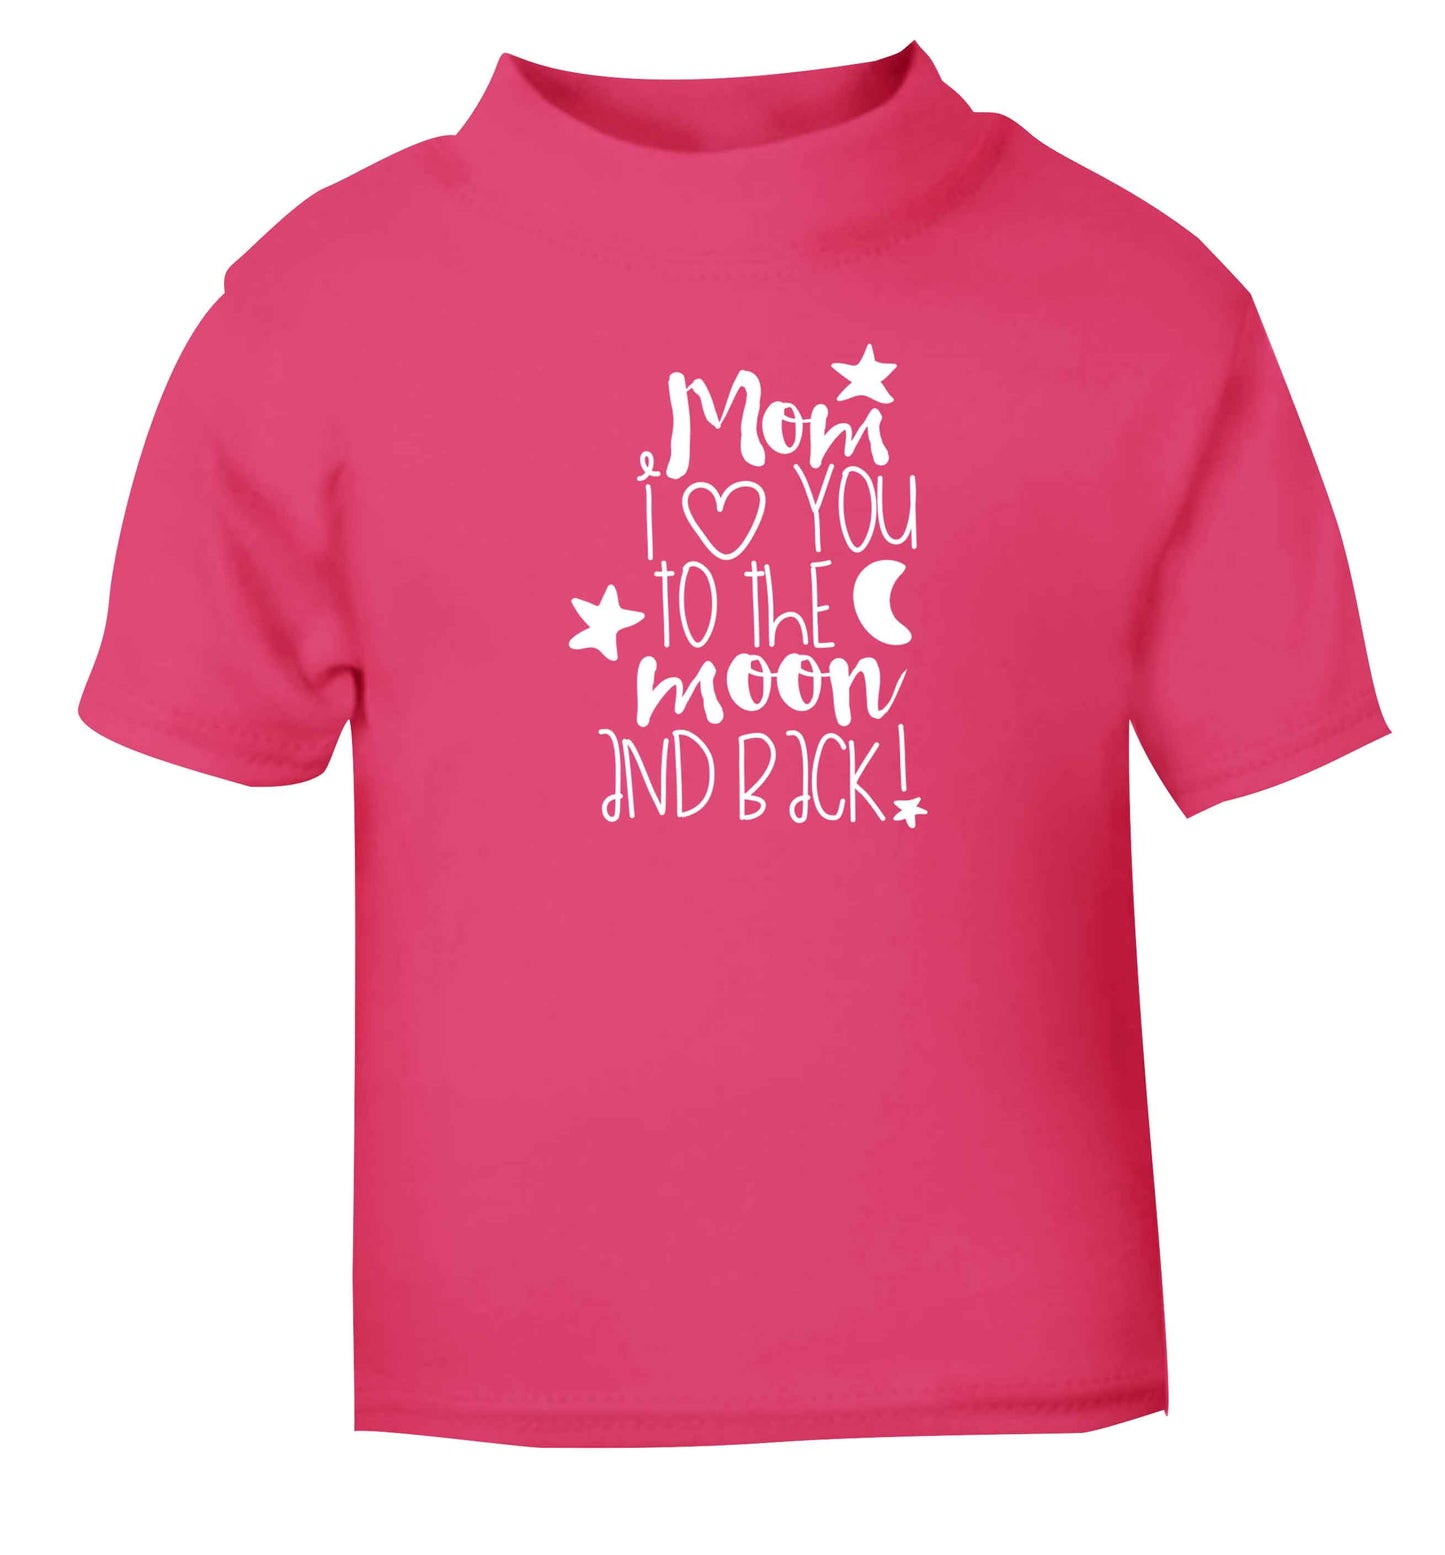 Mom I love you to the moon and back pink baby toddler Tshirt 2 Years